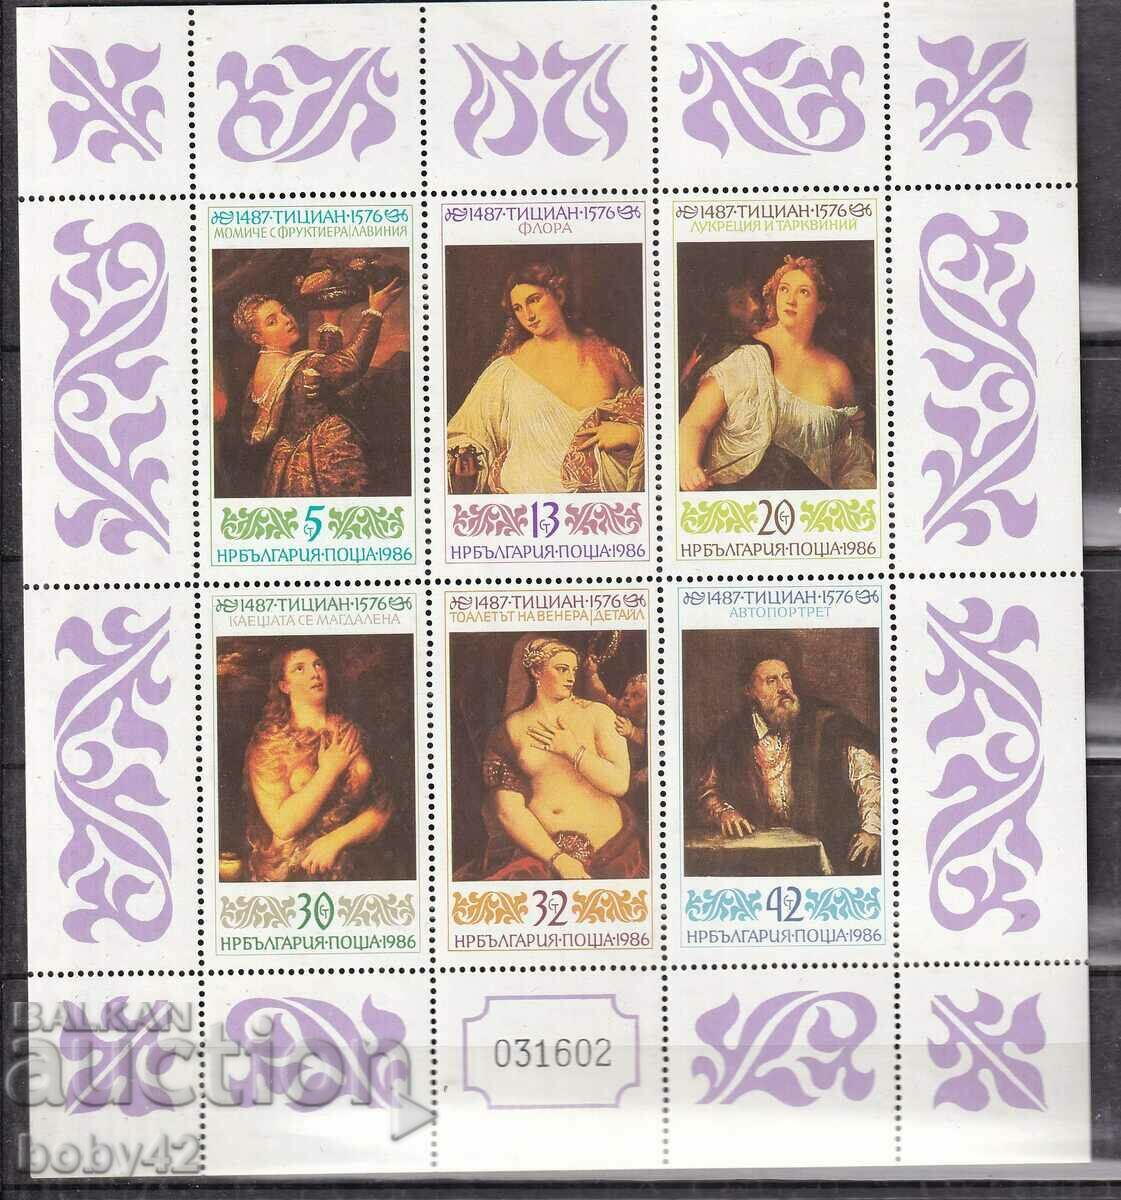 BK 6557-3562 block sheet 600 years from the birth of Titian